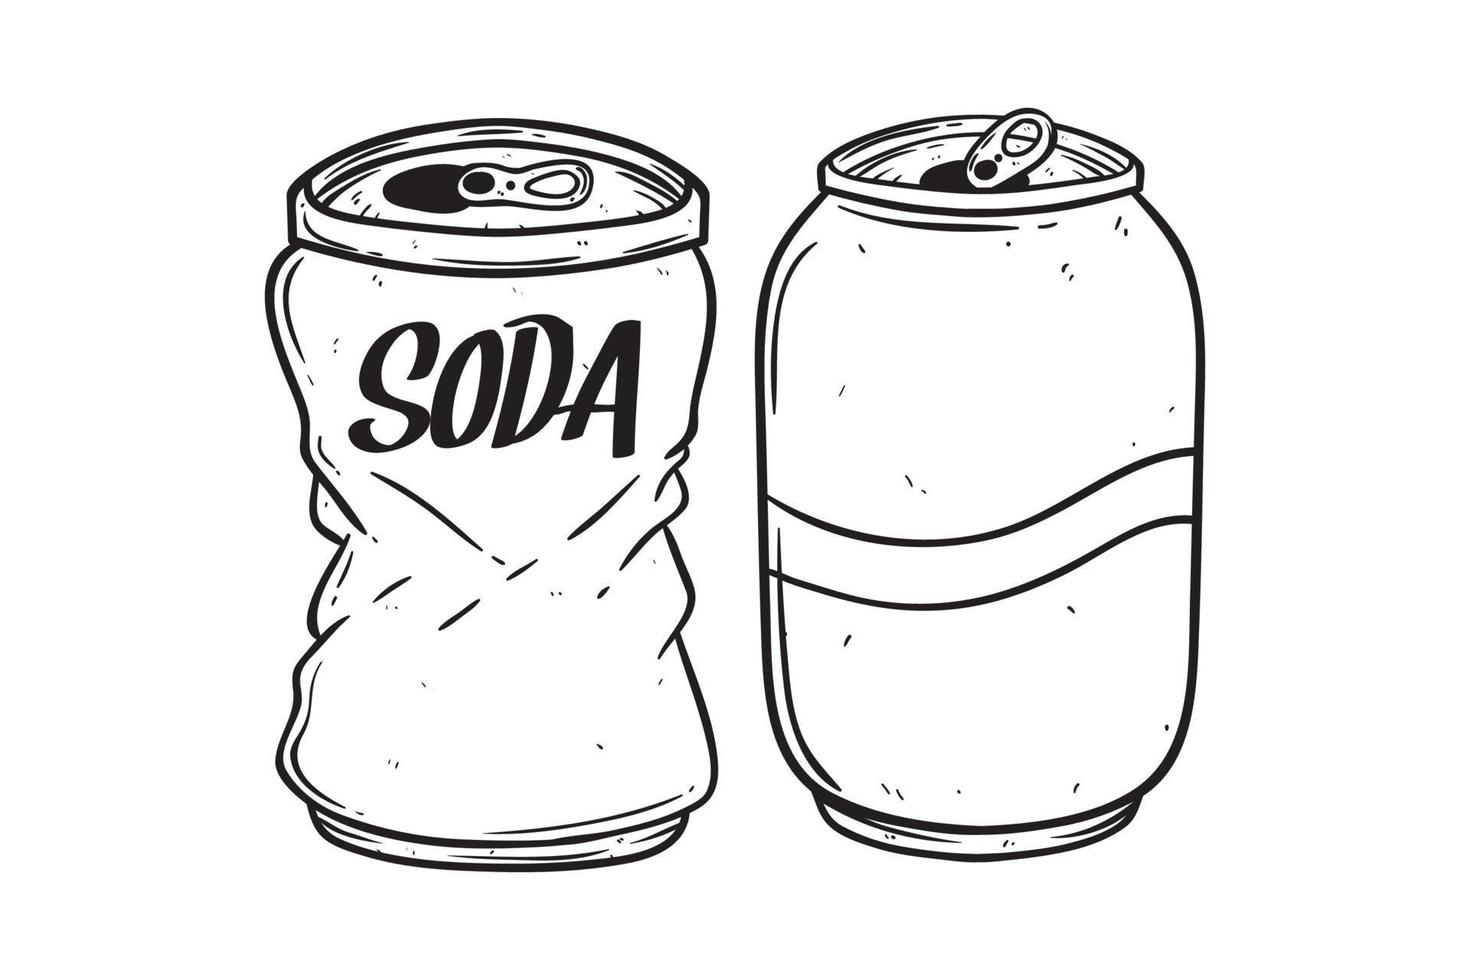 soda can hand drawing on white background vector